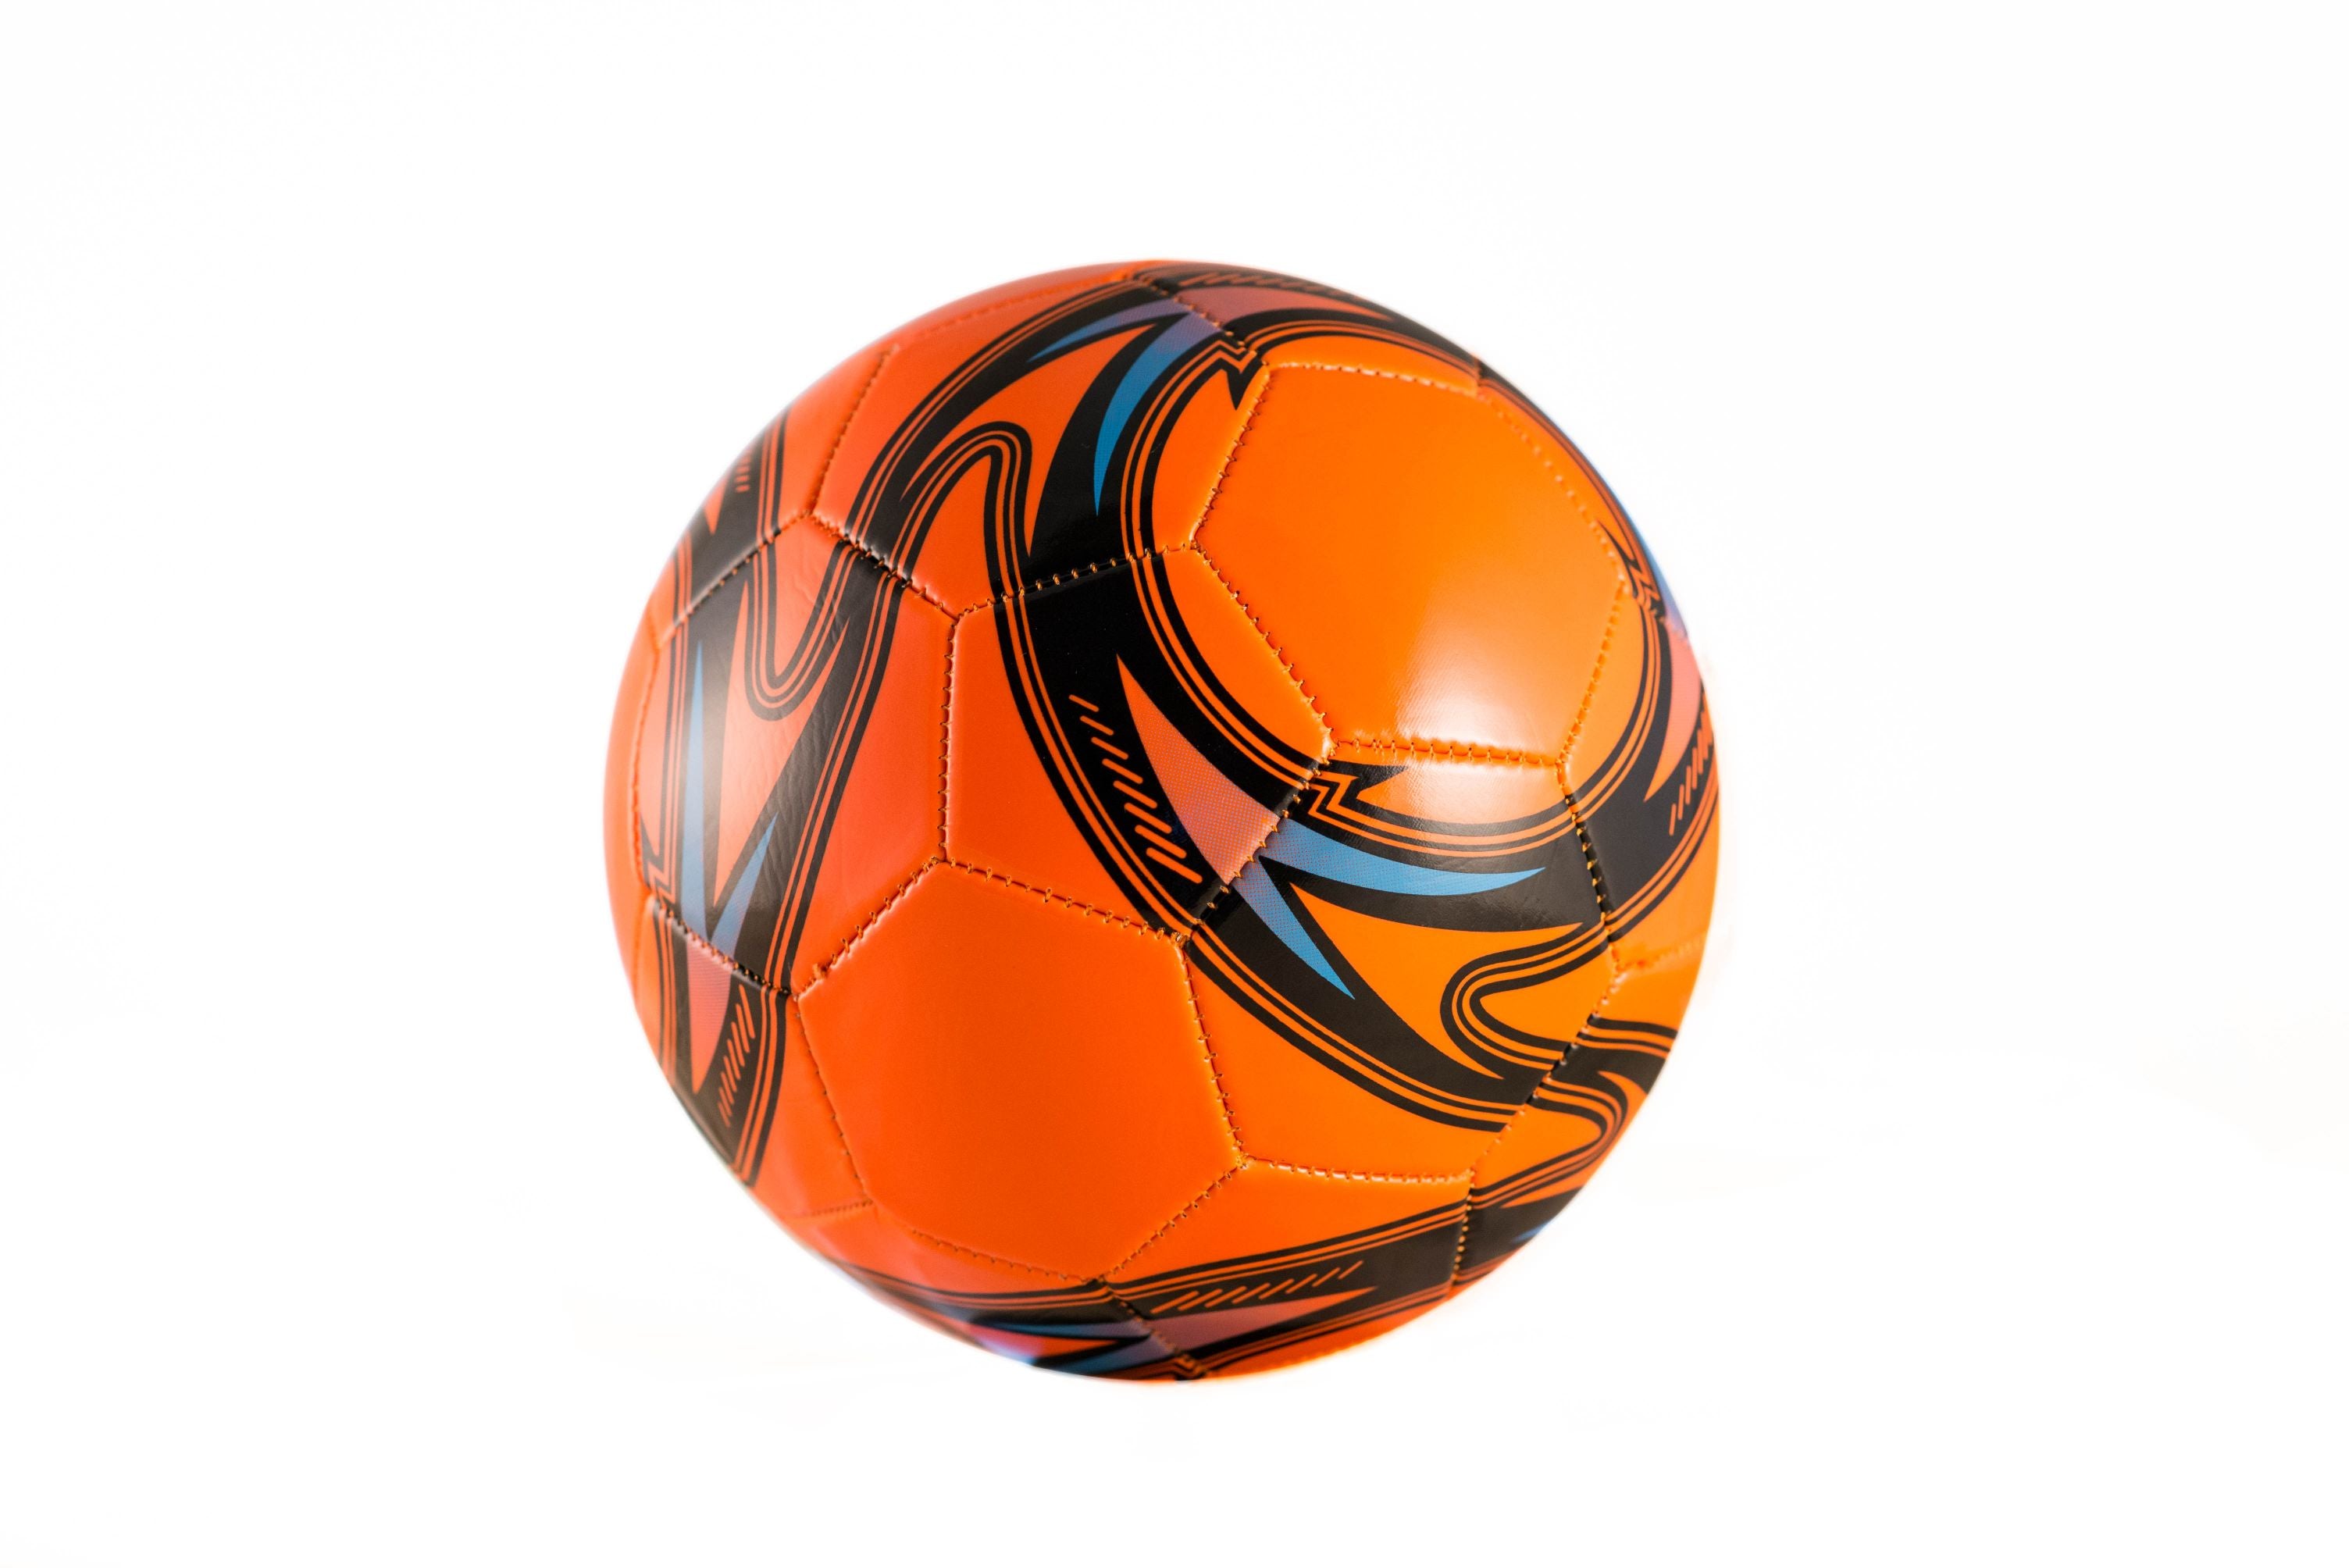  Western Star Soccer Ball American USA Size 3 & Size 4 & Size 5  - Official Match Weight - Youth & Adult Soccer Players - Durable,  Long-Lasting Construction & Attractive